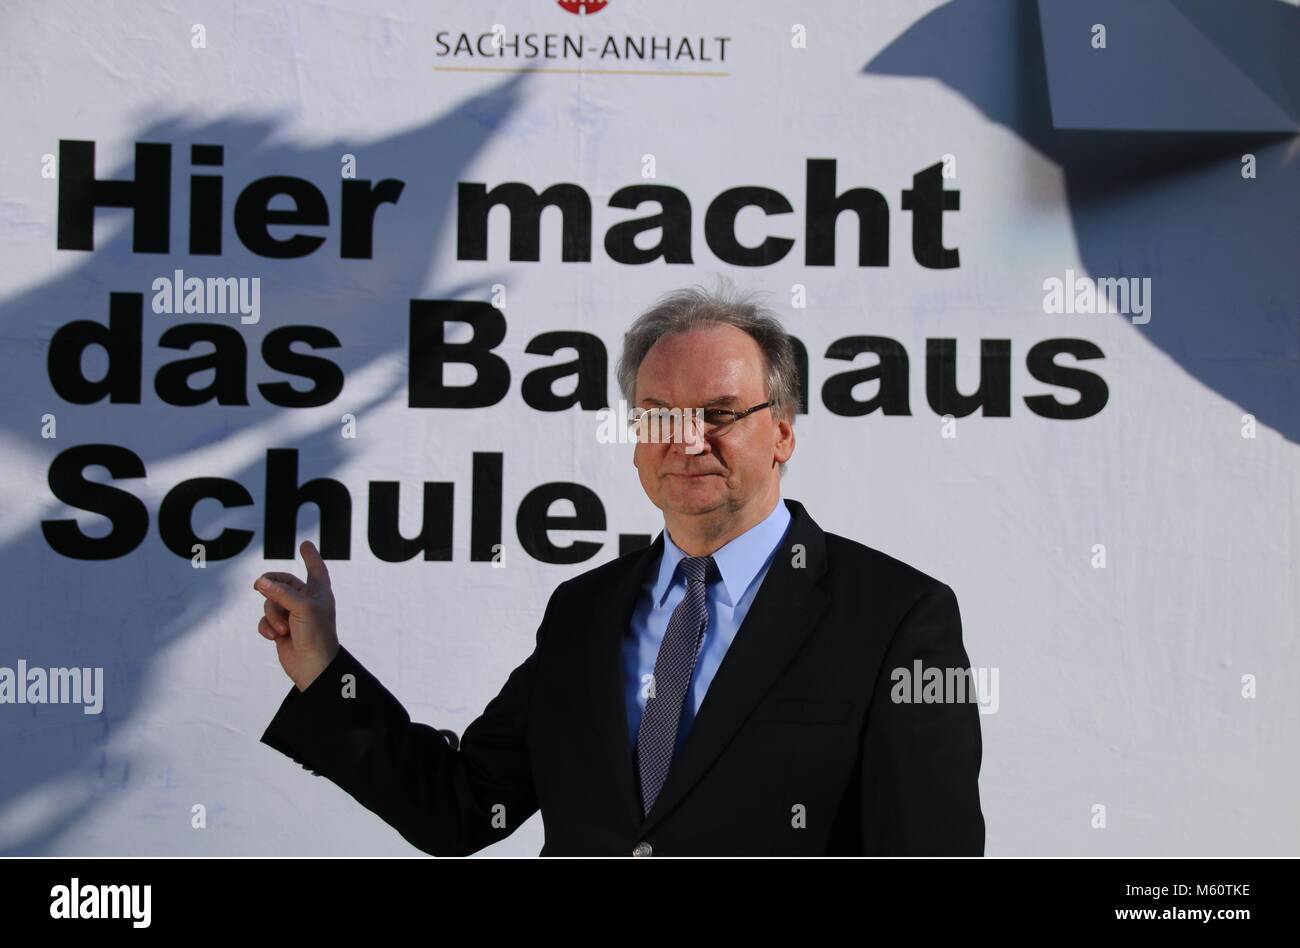 Magdeburg, Germany - February 27,2018: Reiner Haseloff, Prime Minister of Saxony-Anhalt, unveils a sign to draw attention to the Bauhaus anniversary in 2019.16 such signs will be erected along the German motorways. Next year, the world-famous Bauhaus School of Architecture and Art will be one hundred years old. The East German state of Saxony-Anhalt will celebrate the anniversary in Dessau, where the Bauhaus building is located. Famous representatives of the Bauhaus were Walter Gropius, Lyonel Feininger, Johannes Itten, Josef Albers, Paul Klee, Wassily Kandinsky and Oskar Schlemmer. Stock Photo